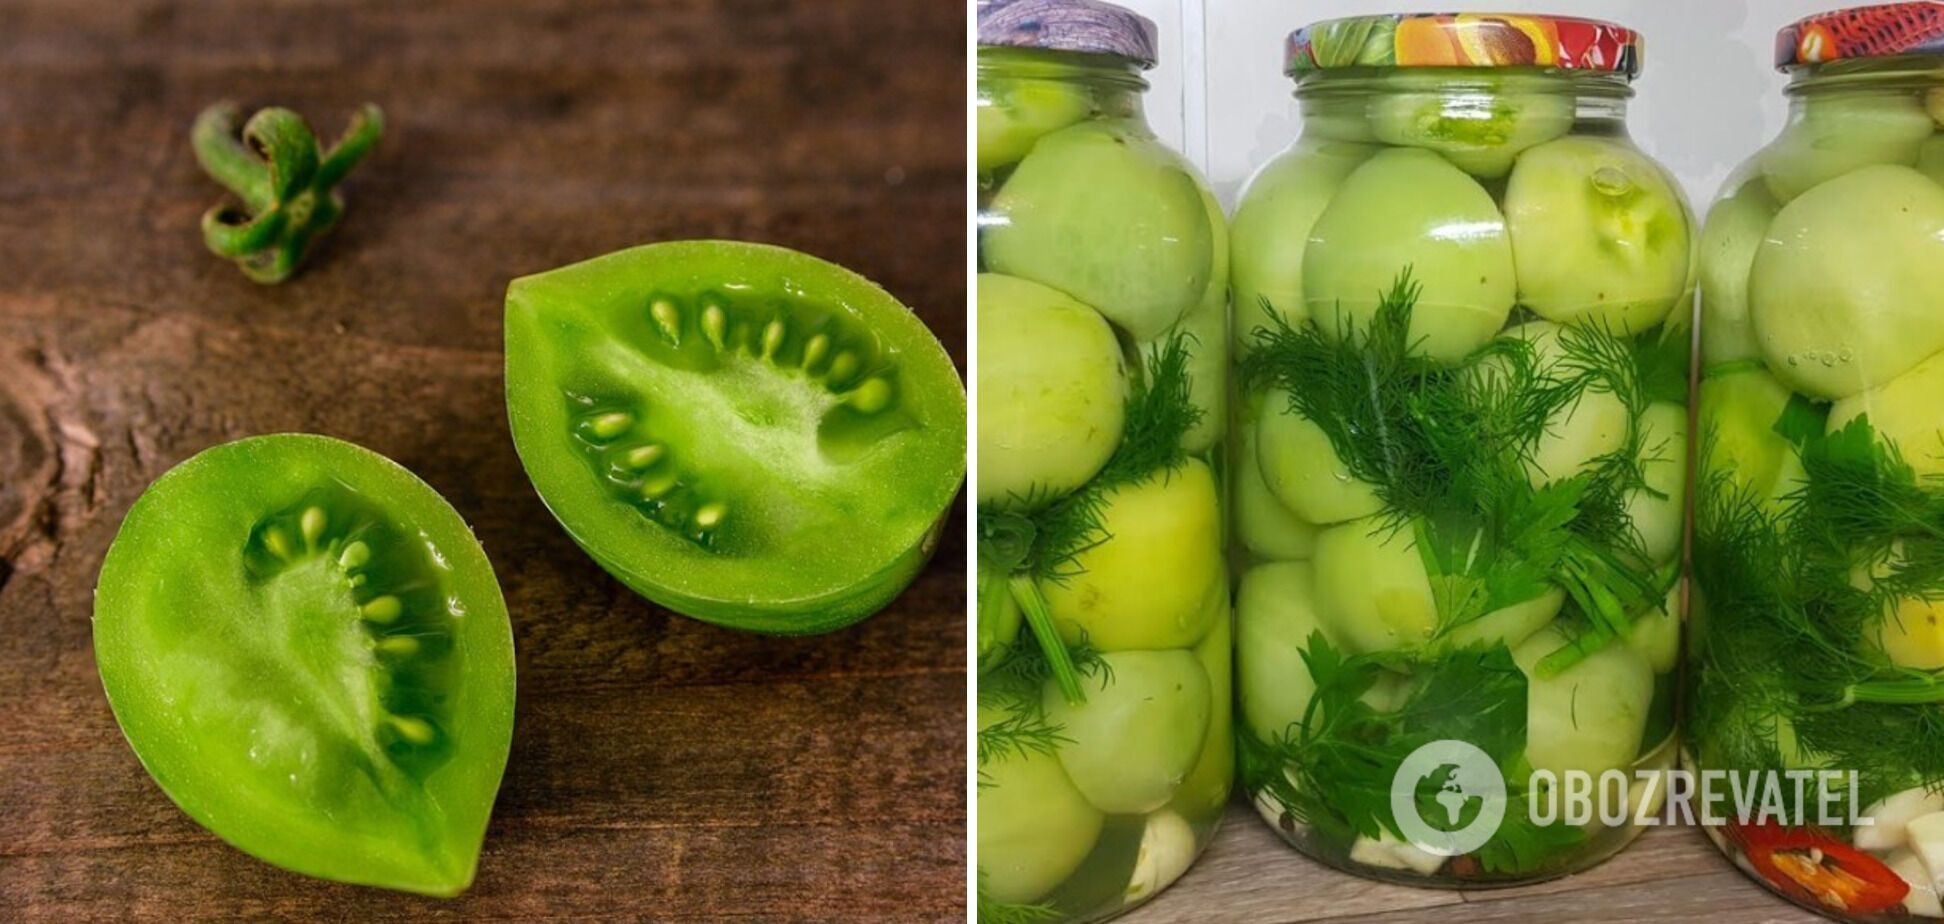 Korean-style green tomatoes for winter: a great alternative to any salads